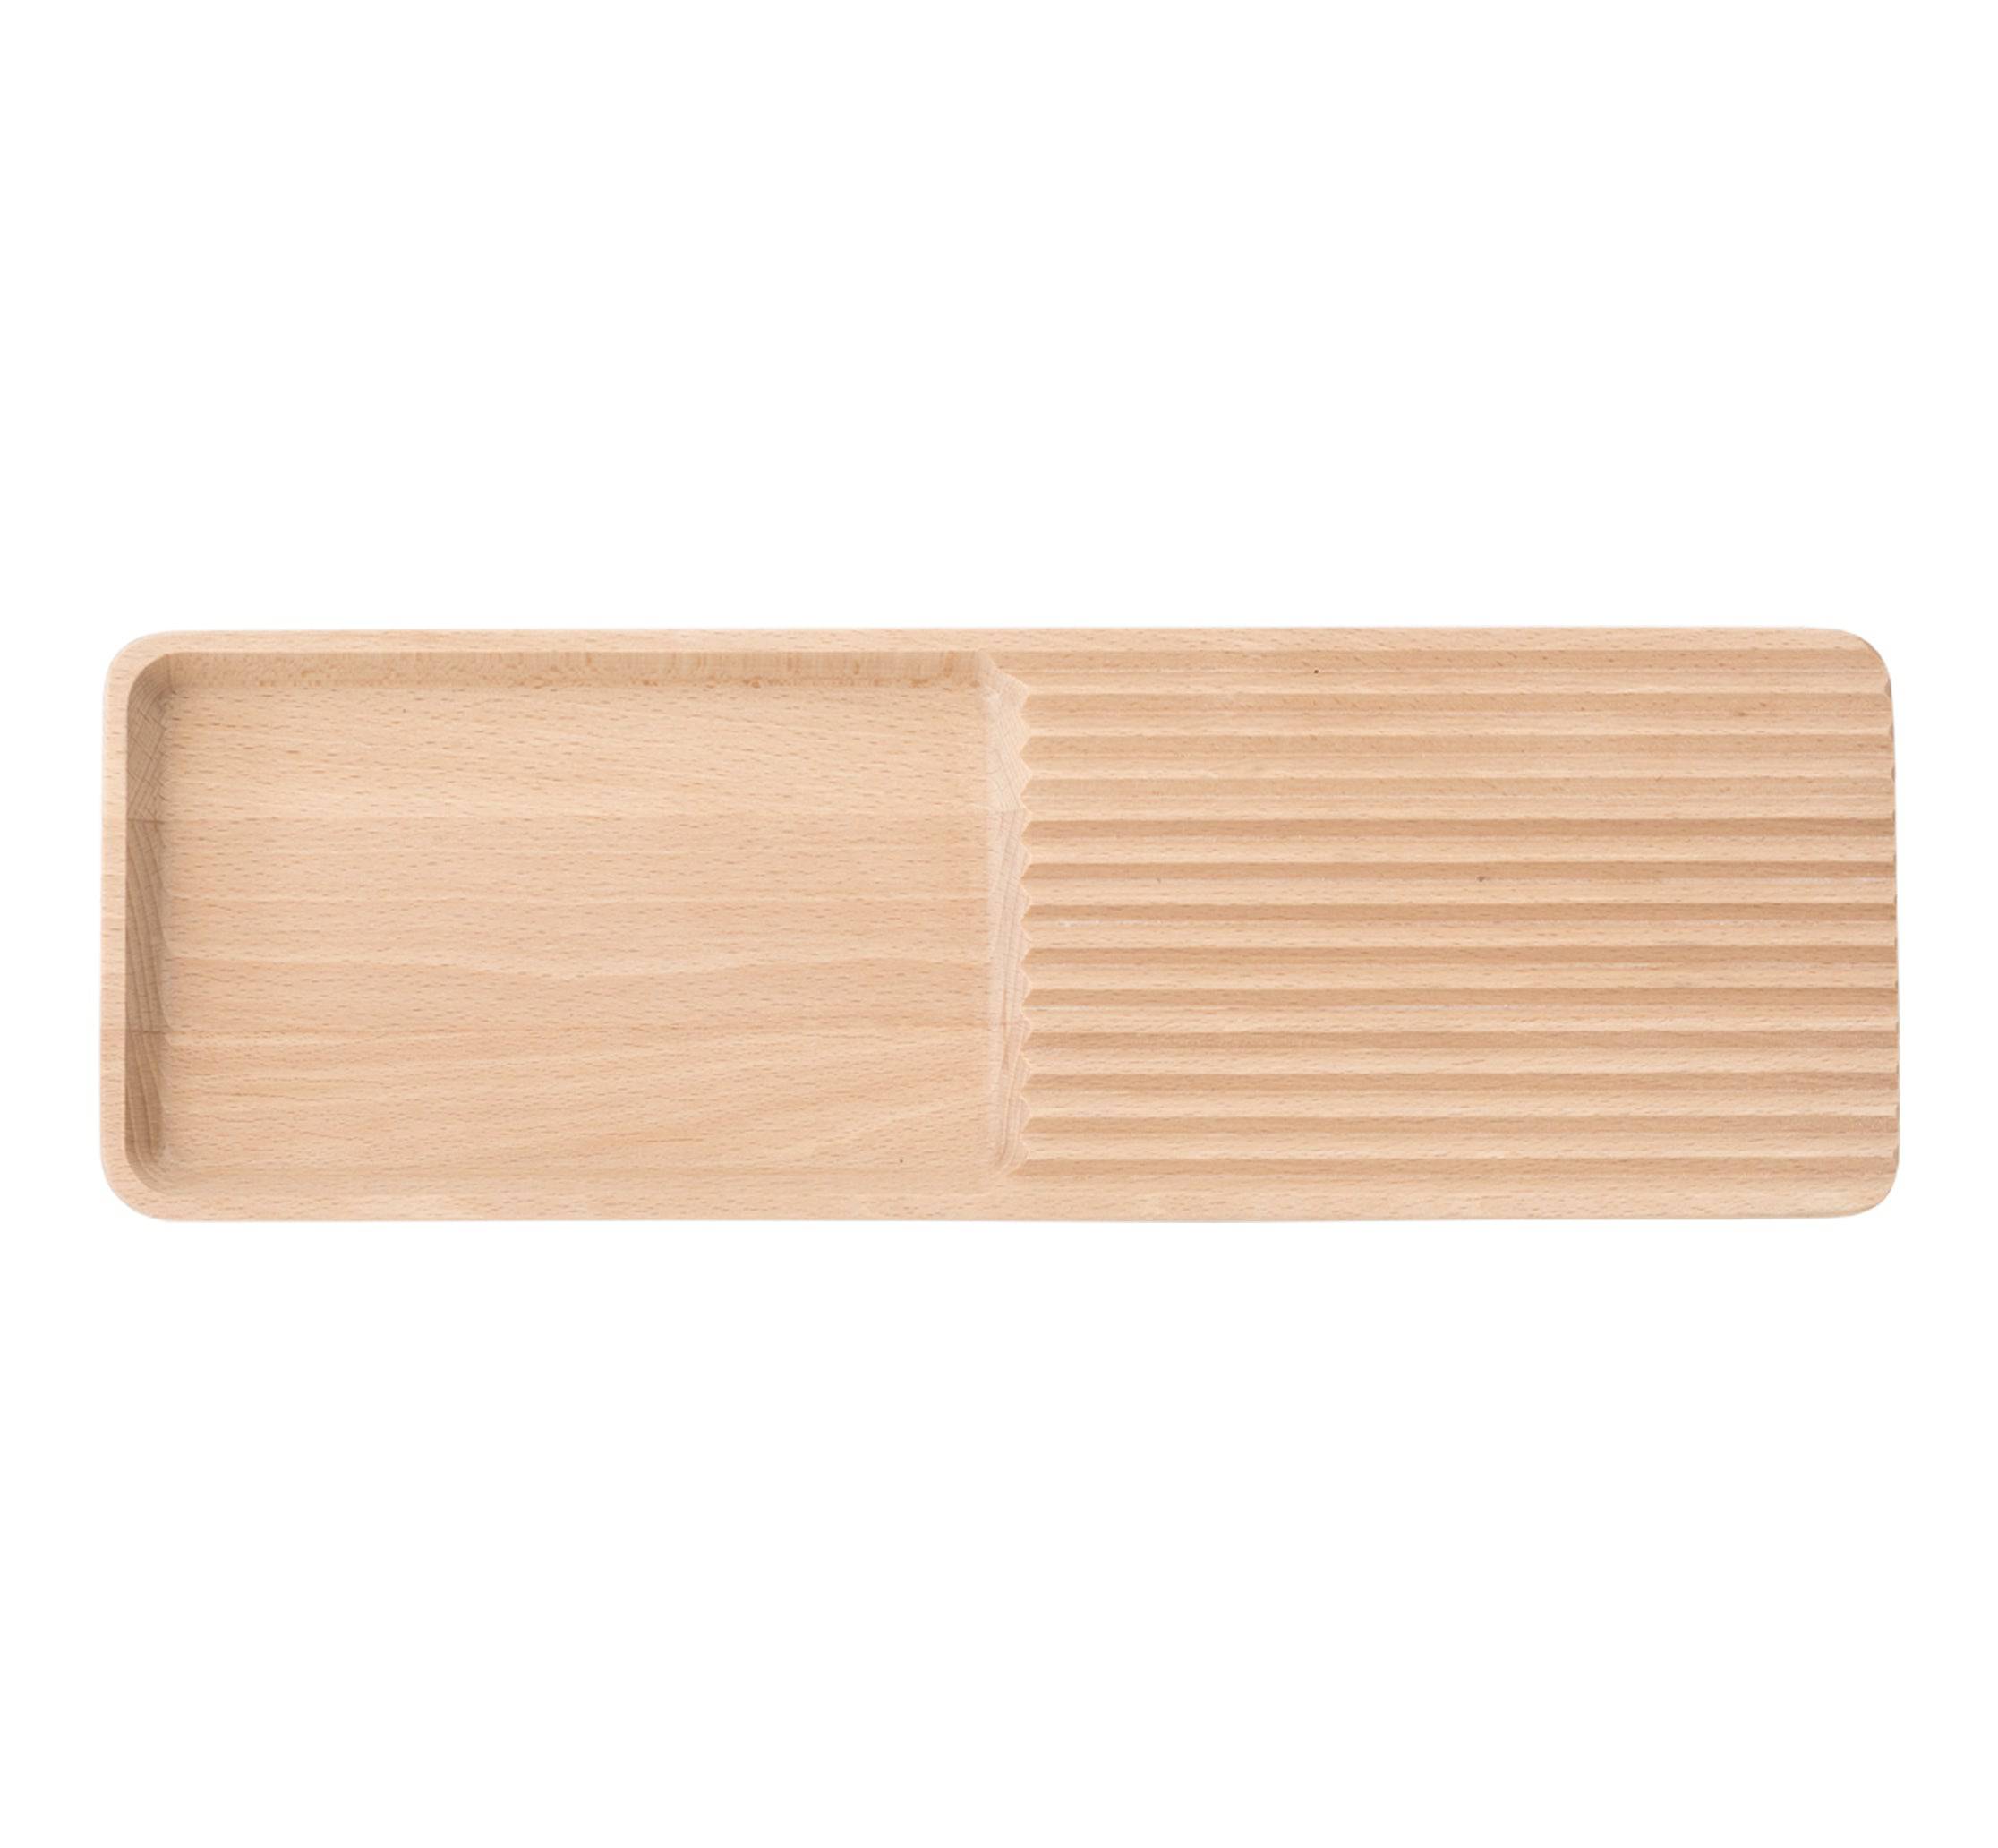 Plough Serving Board - THAT COOL LIVING